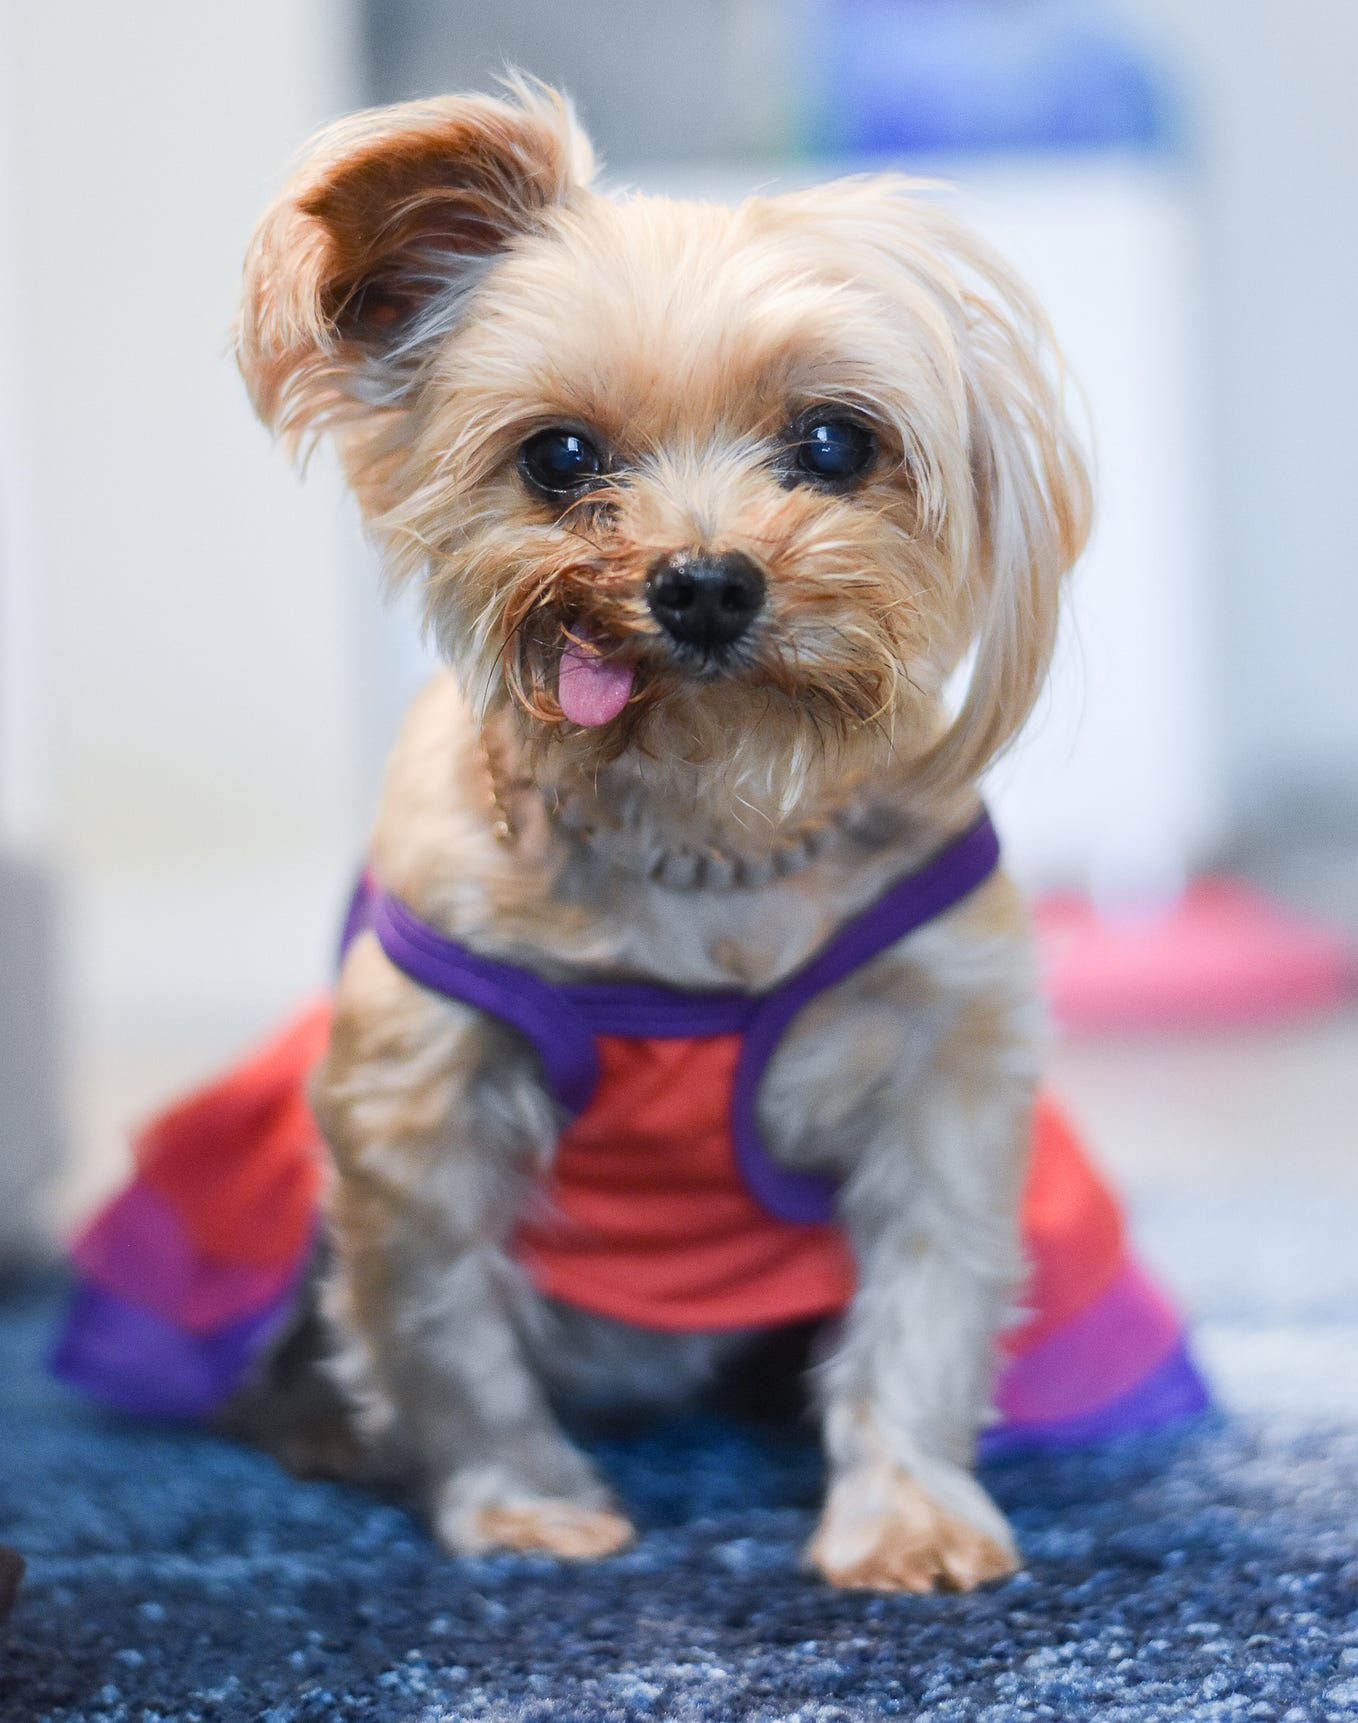 Roo the Yorkie is sitting all dressed up, waiting for attention.